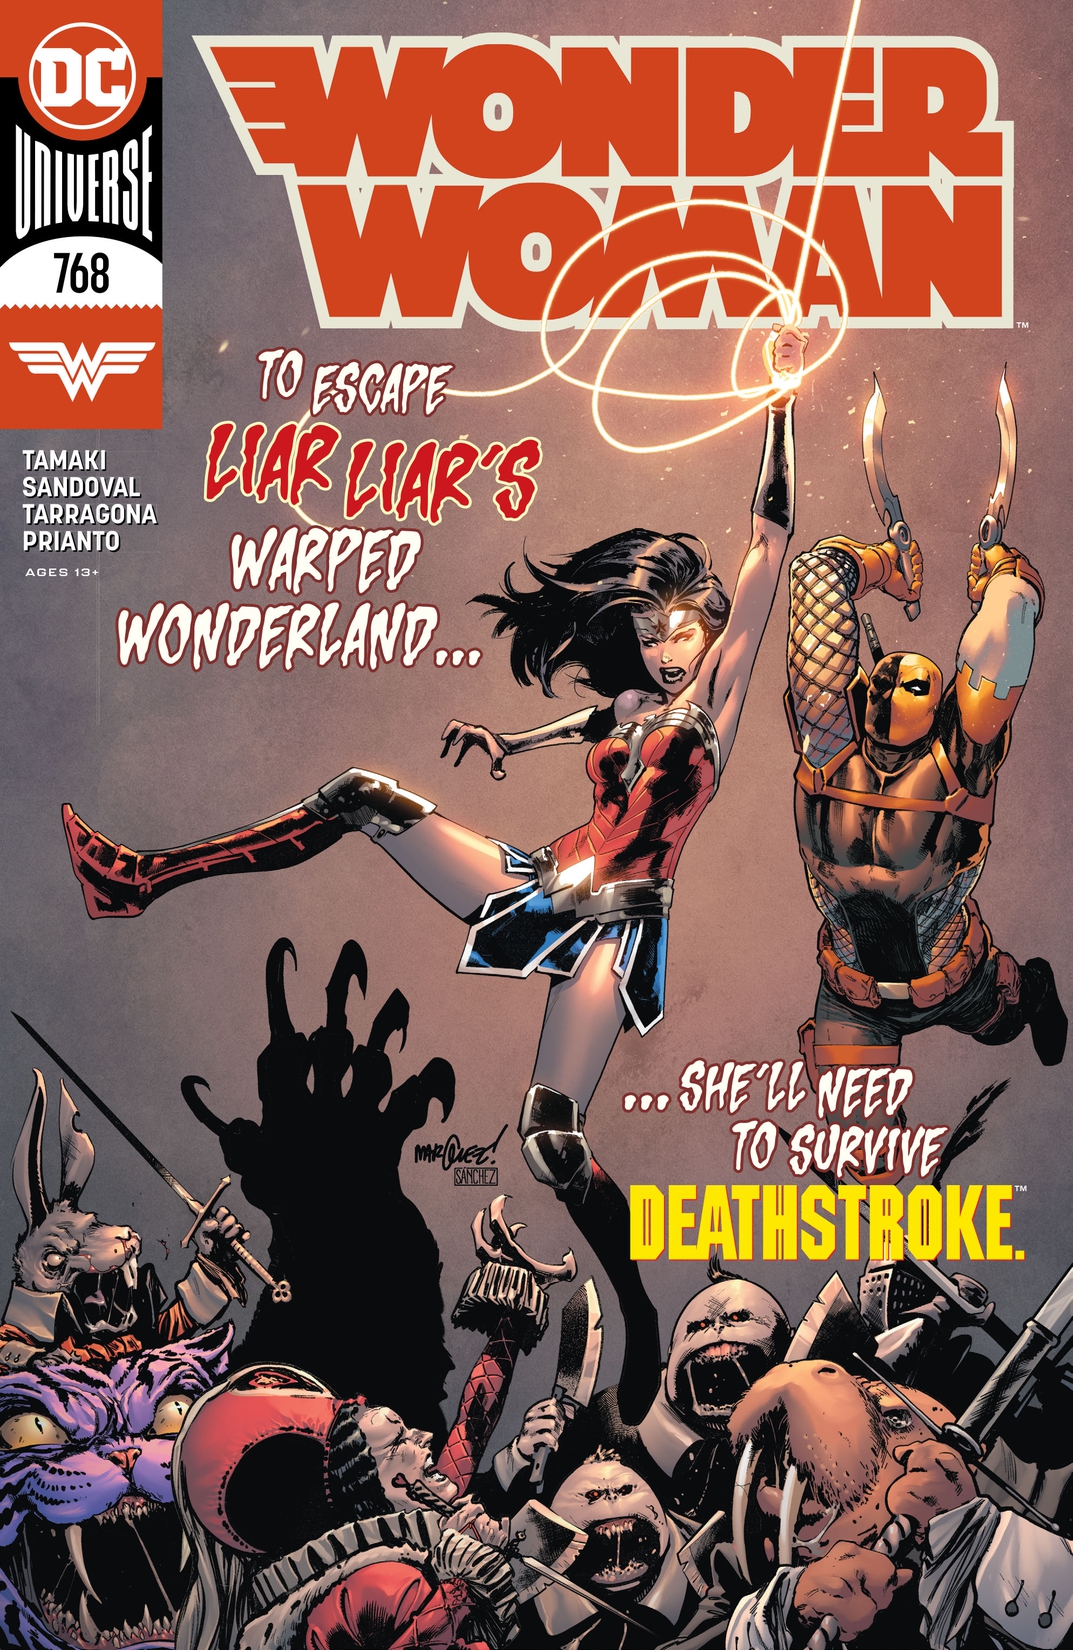 Wonder Woman (2016-) #768 preview images